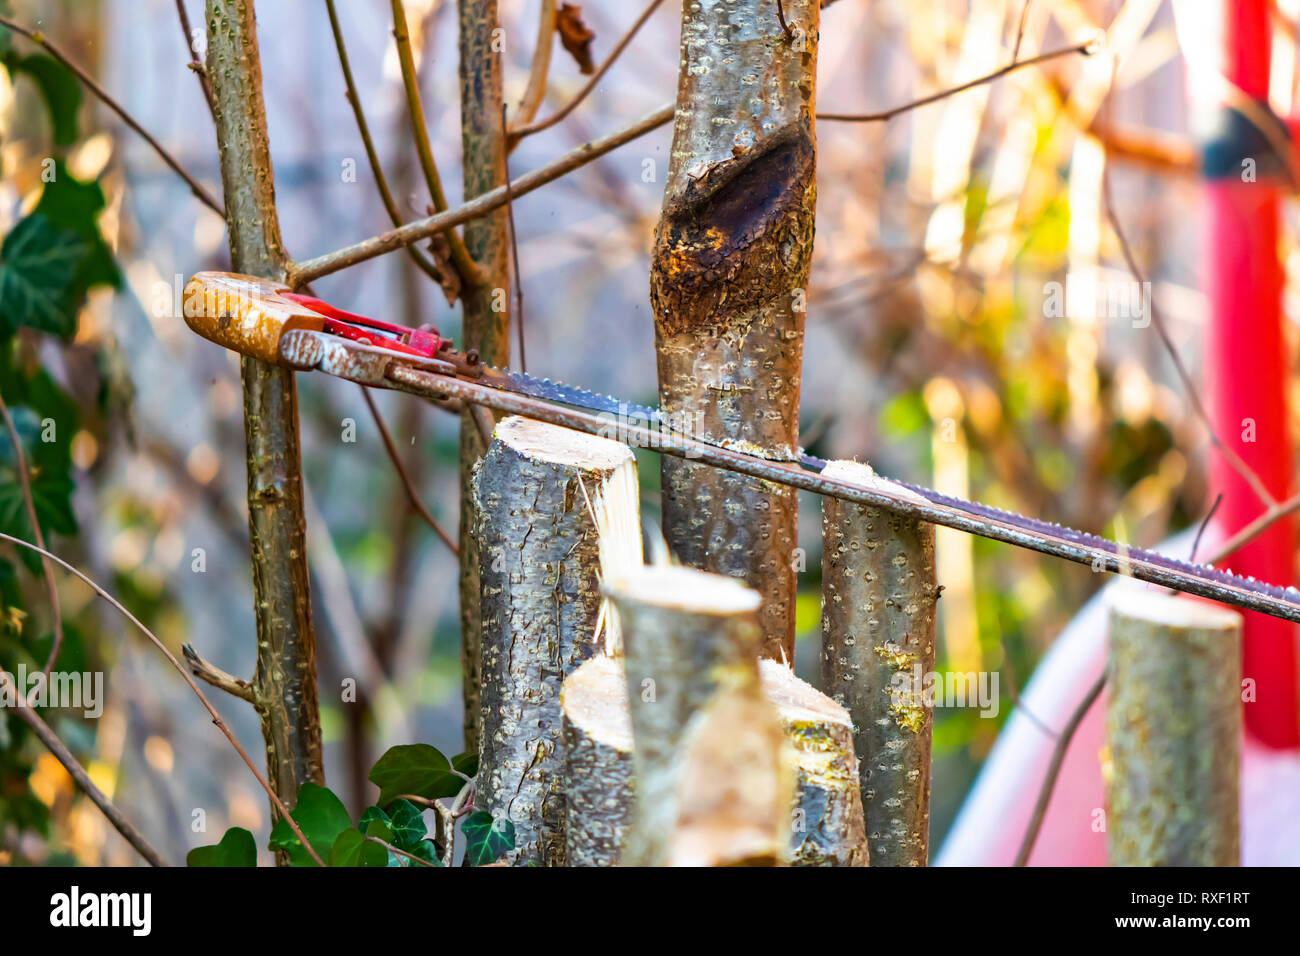 Detail of a saw cutting a young tree for the garden care. Stock Photo